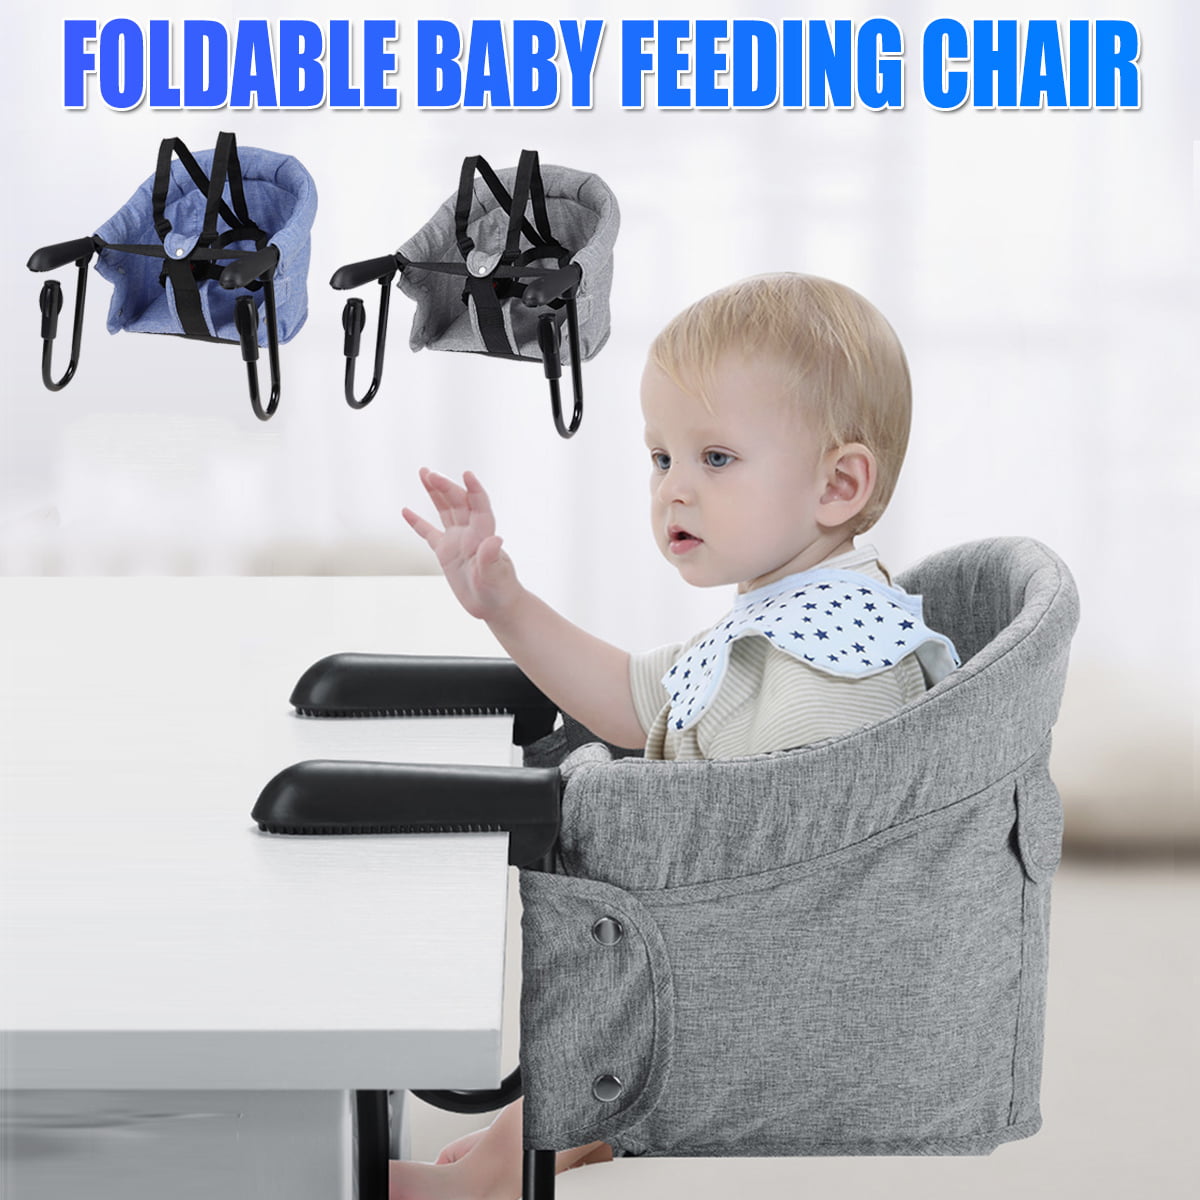 Blue Hook On Chair Fast Table Chair High Load Design Fold Flat Storage Tight Fixing Clip on Table High Chair Removable Seat 